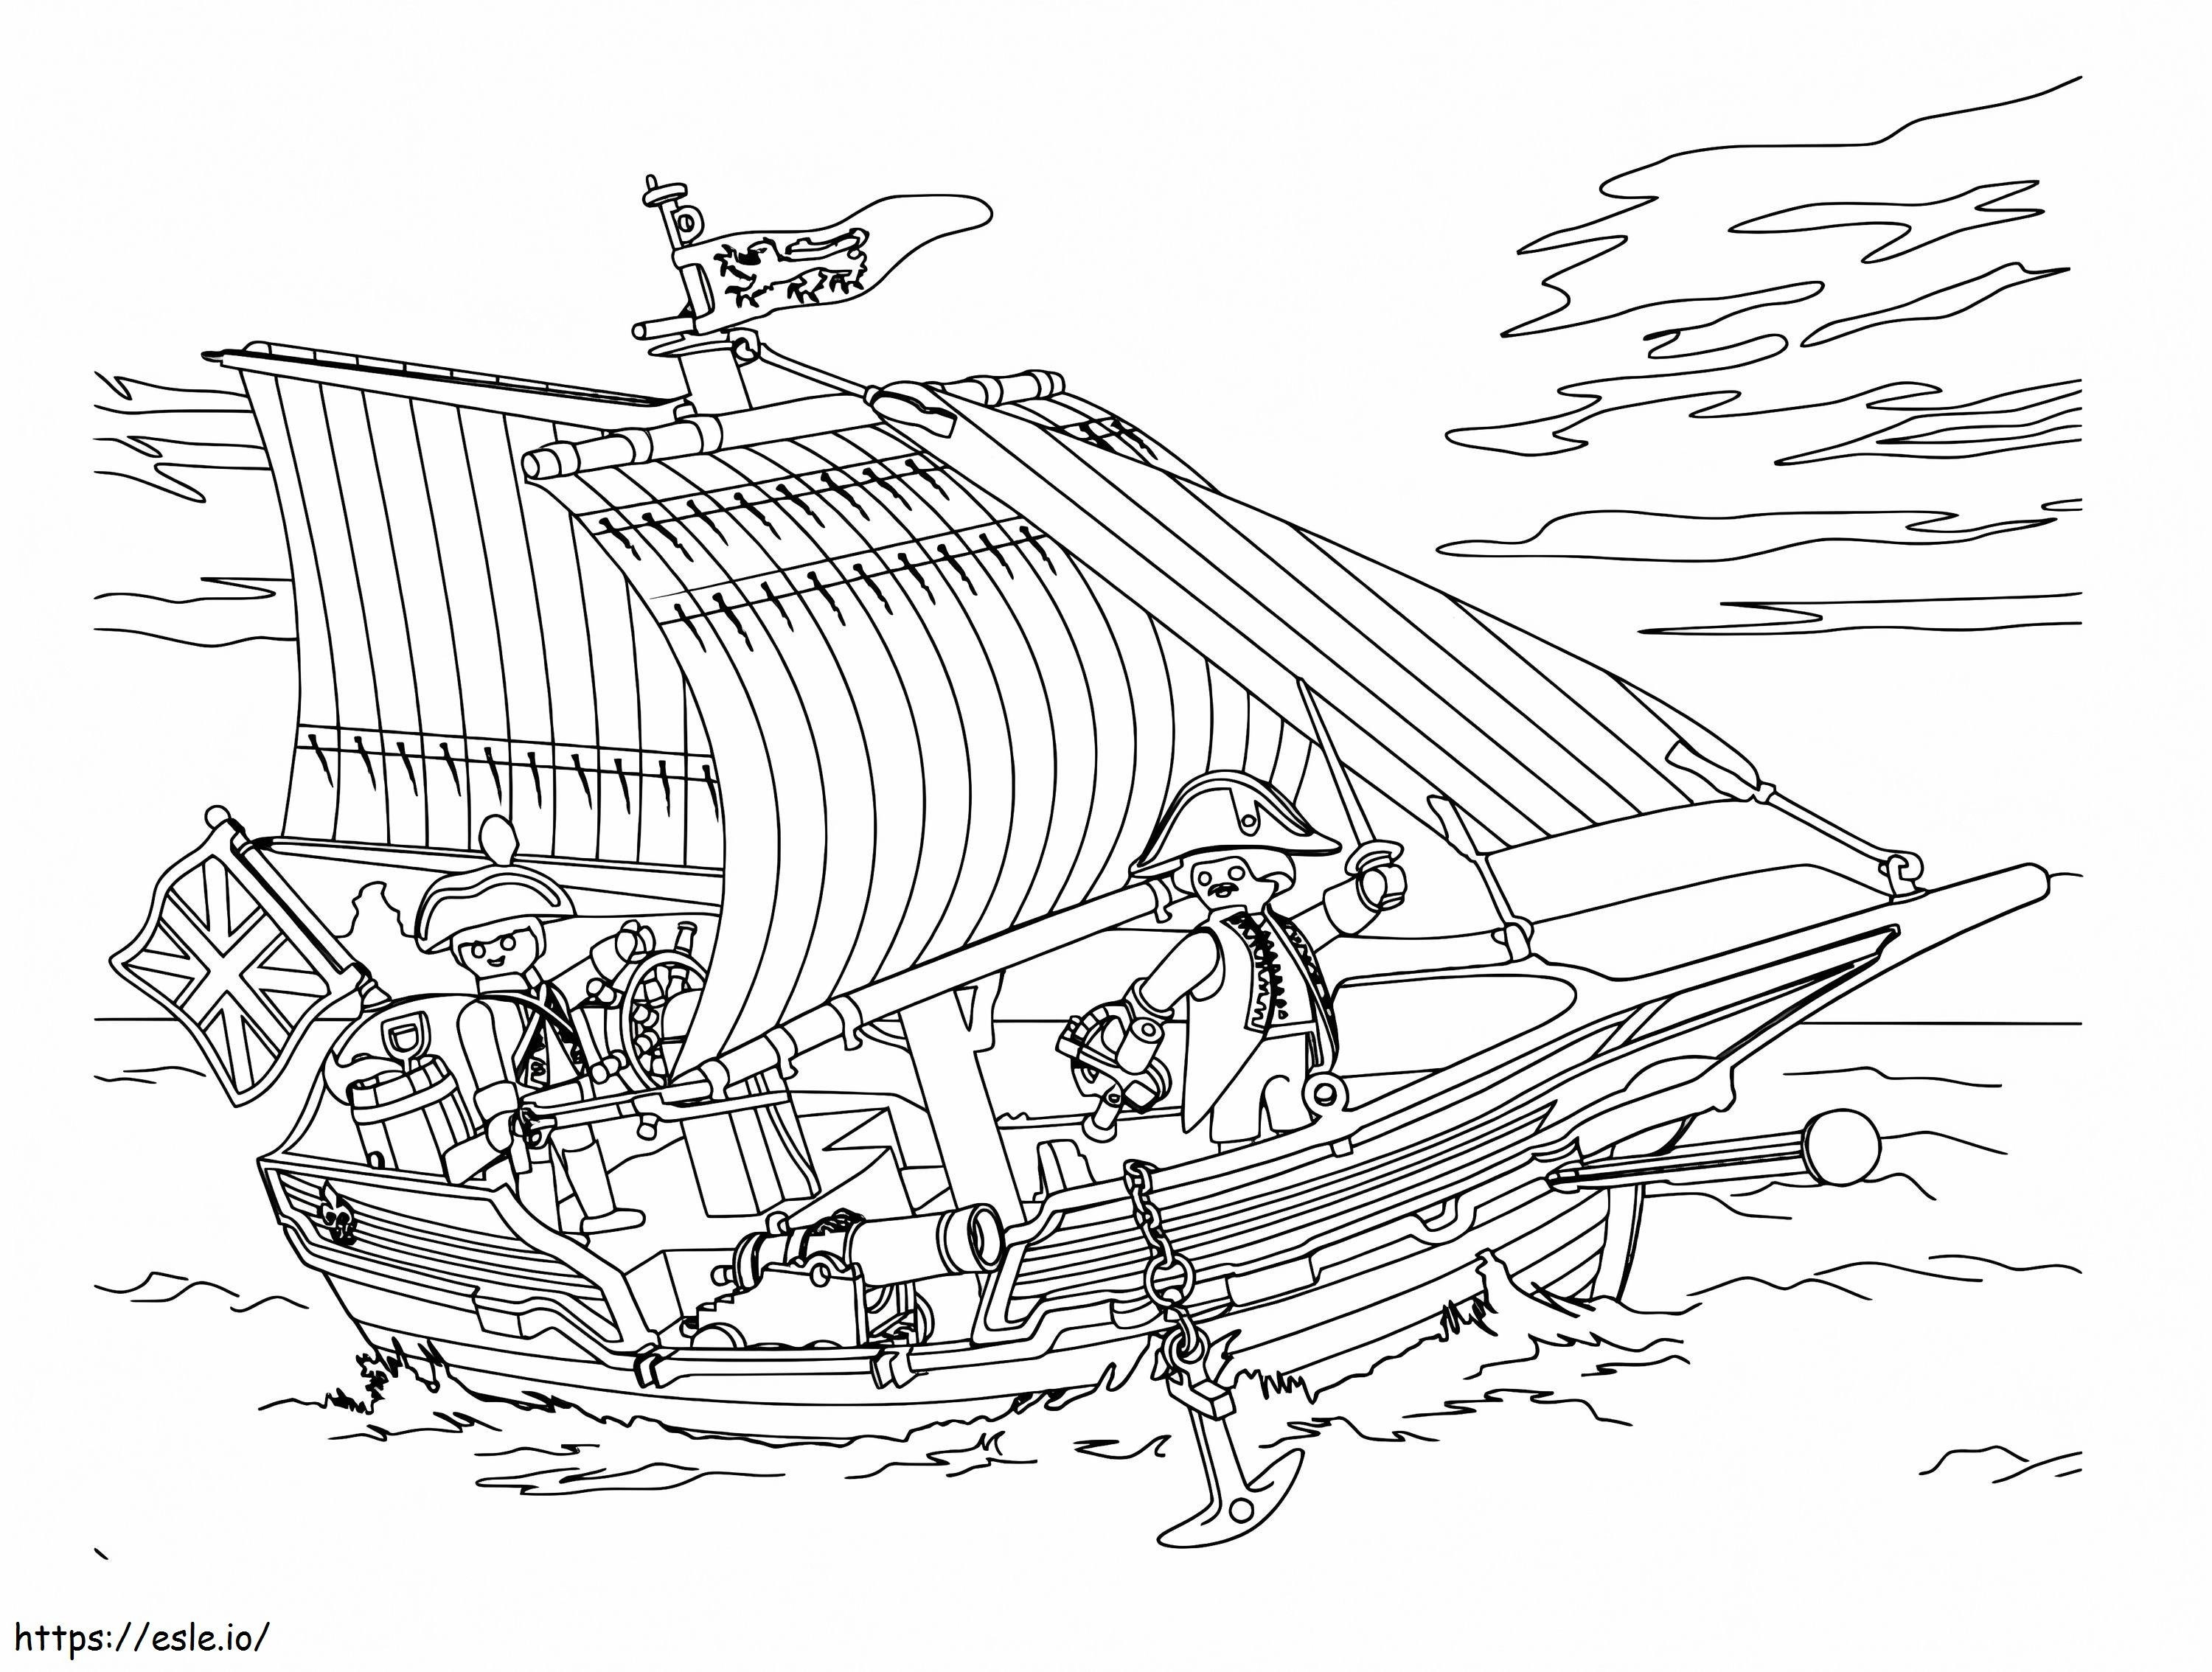 Playmobil Pirate Ship coloring page